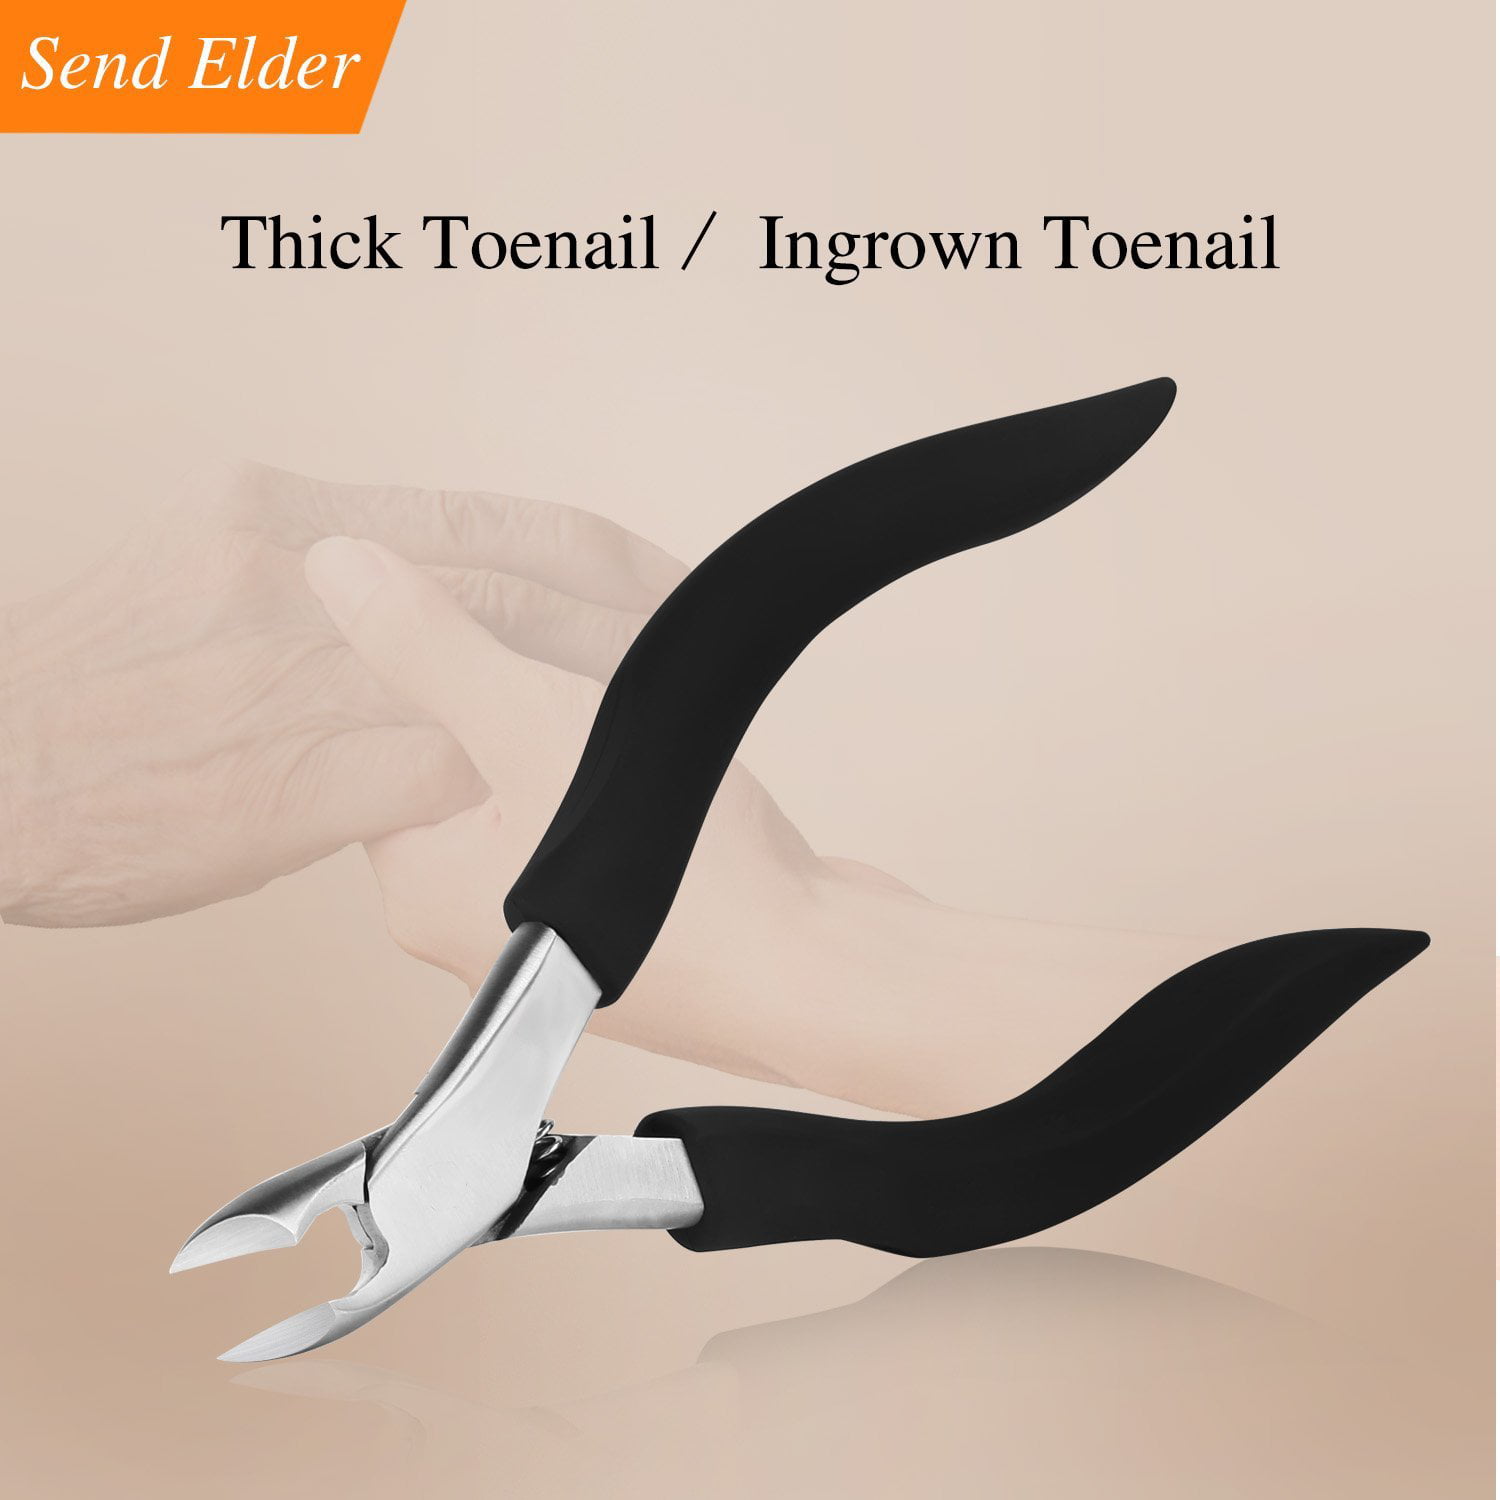 SZCSHOOL Toe Nail Clippers for Thick Toenails, Toenail Clippers for Thick  Nails Easy to Hold- Toenail Clippers for Seniors Thick Toenails